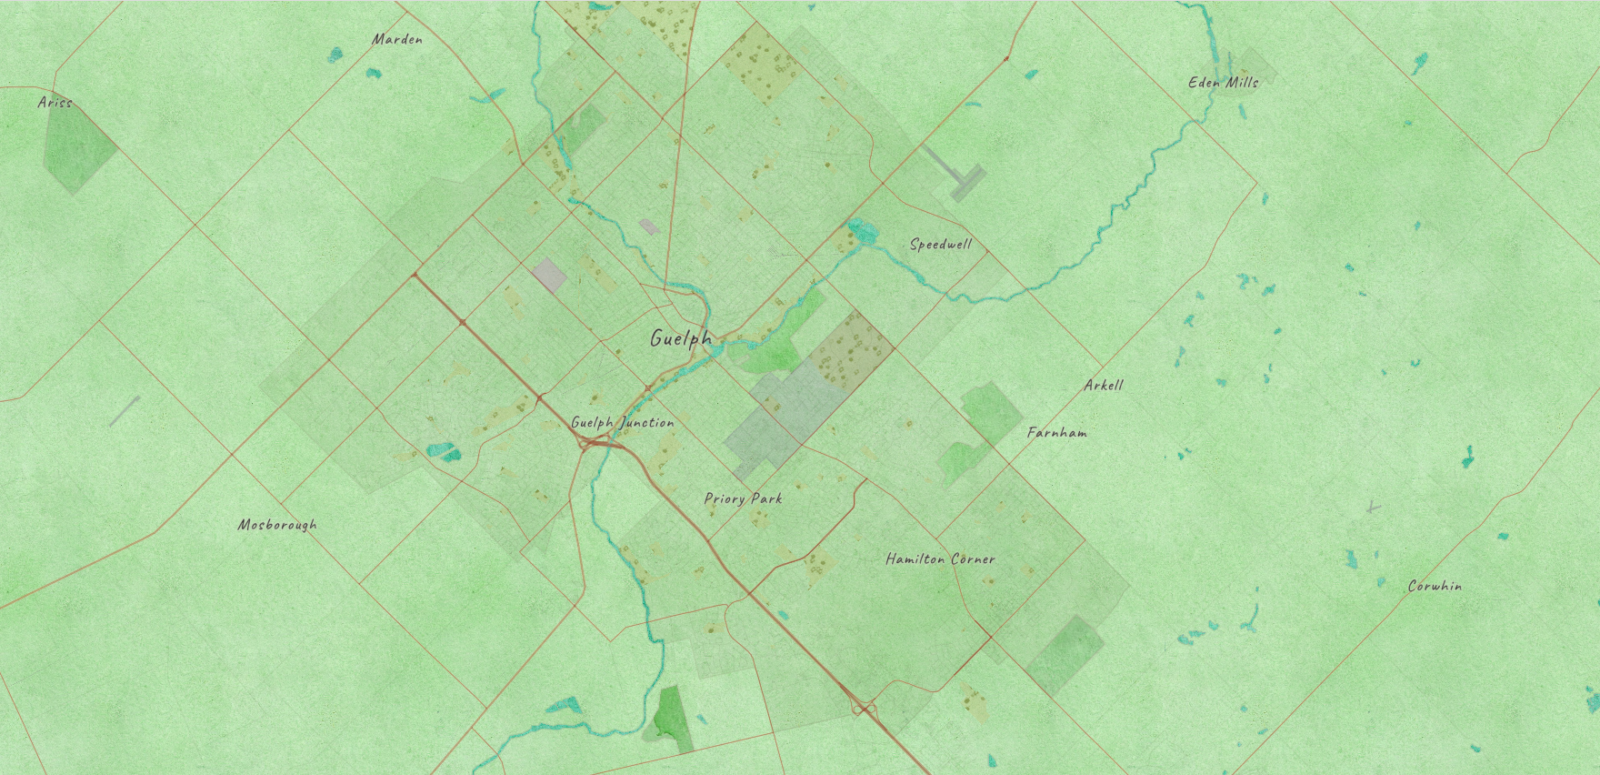 A watercolour map of the city of Guelph and it's surrounding areas.